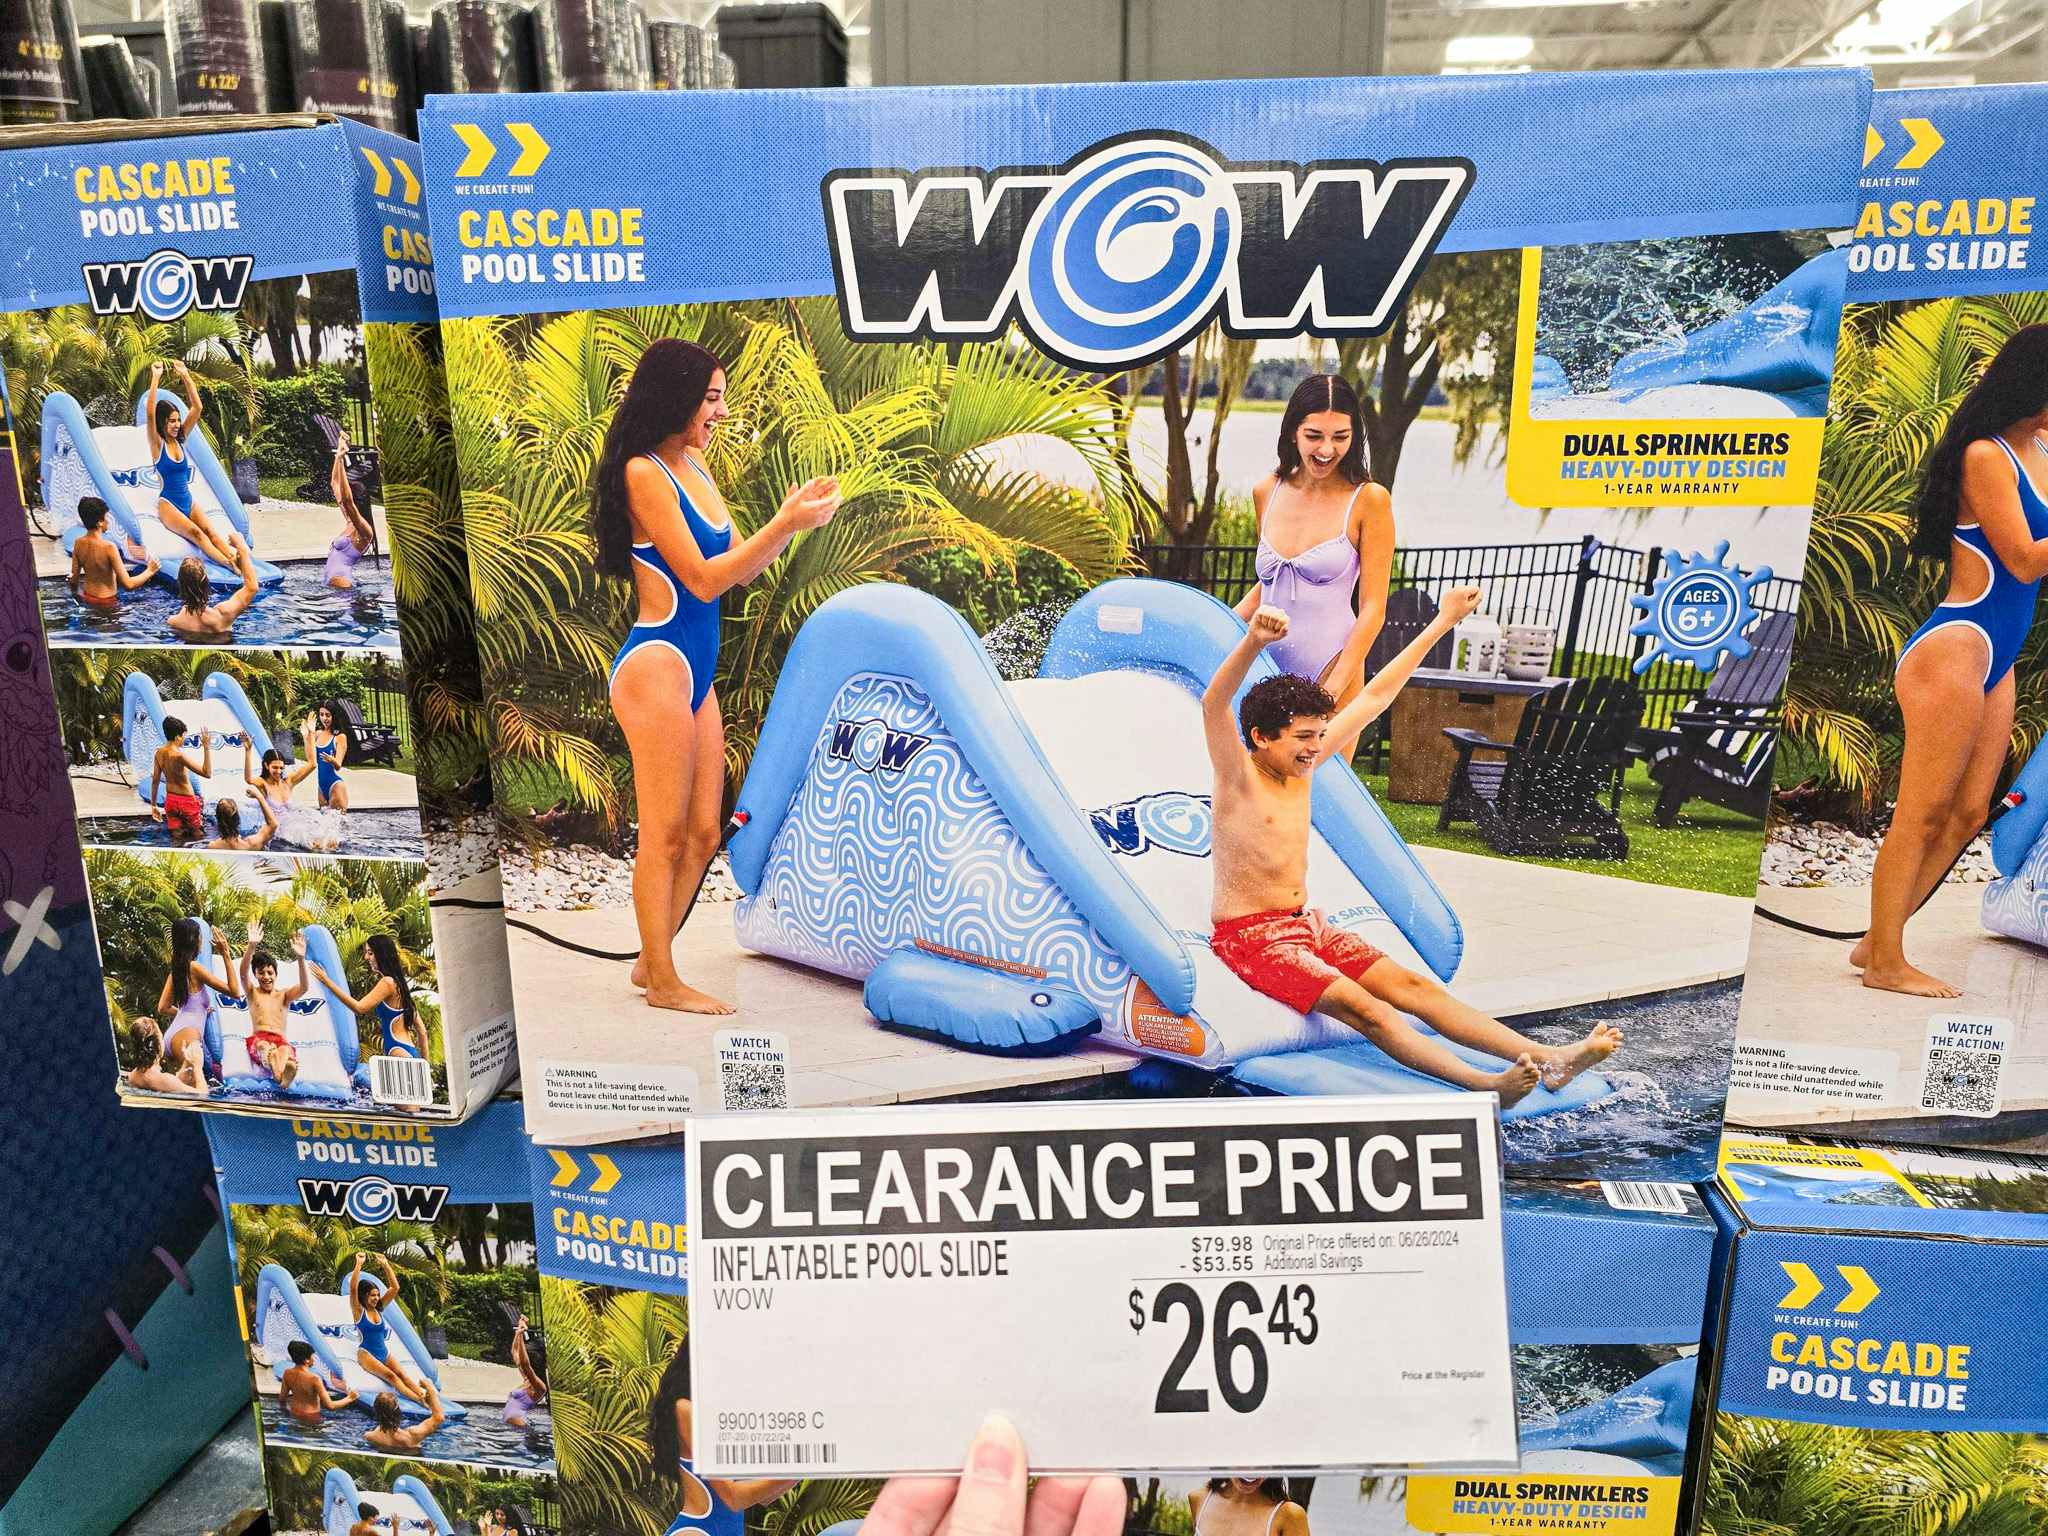 person holding a clearance sign for $26.43 in front of a water slide